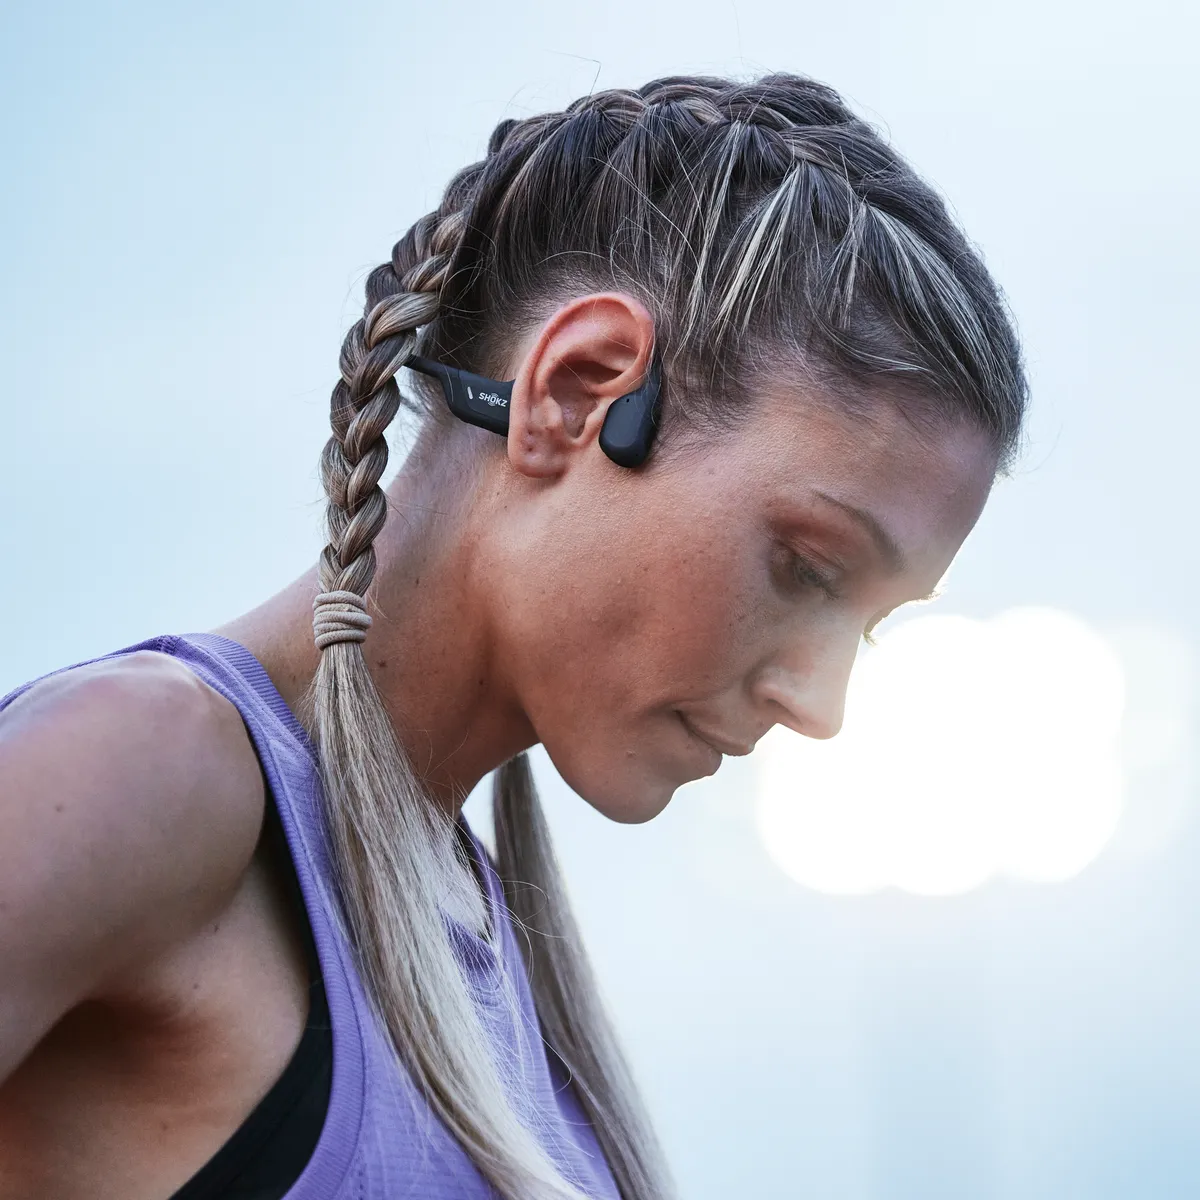 13 Amazing Bluetooth Earbuds For Running for 2023